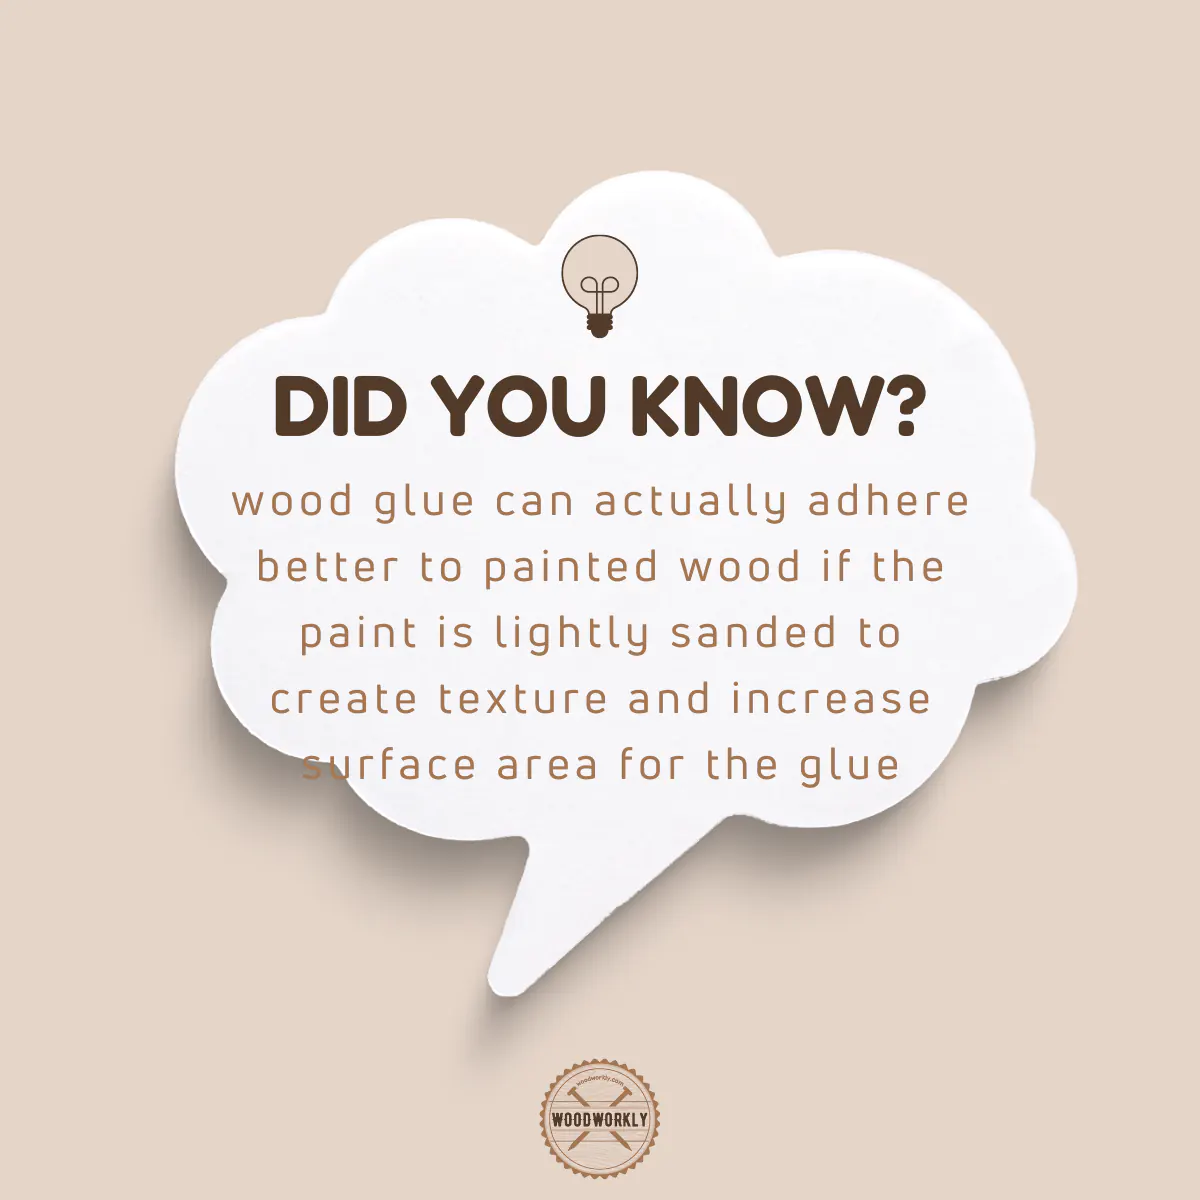 Did you know fact about using wood glue on painted wood